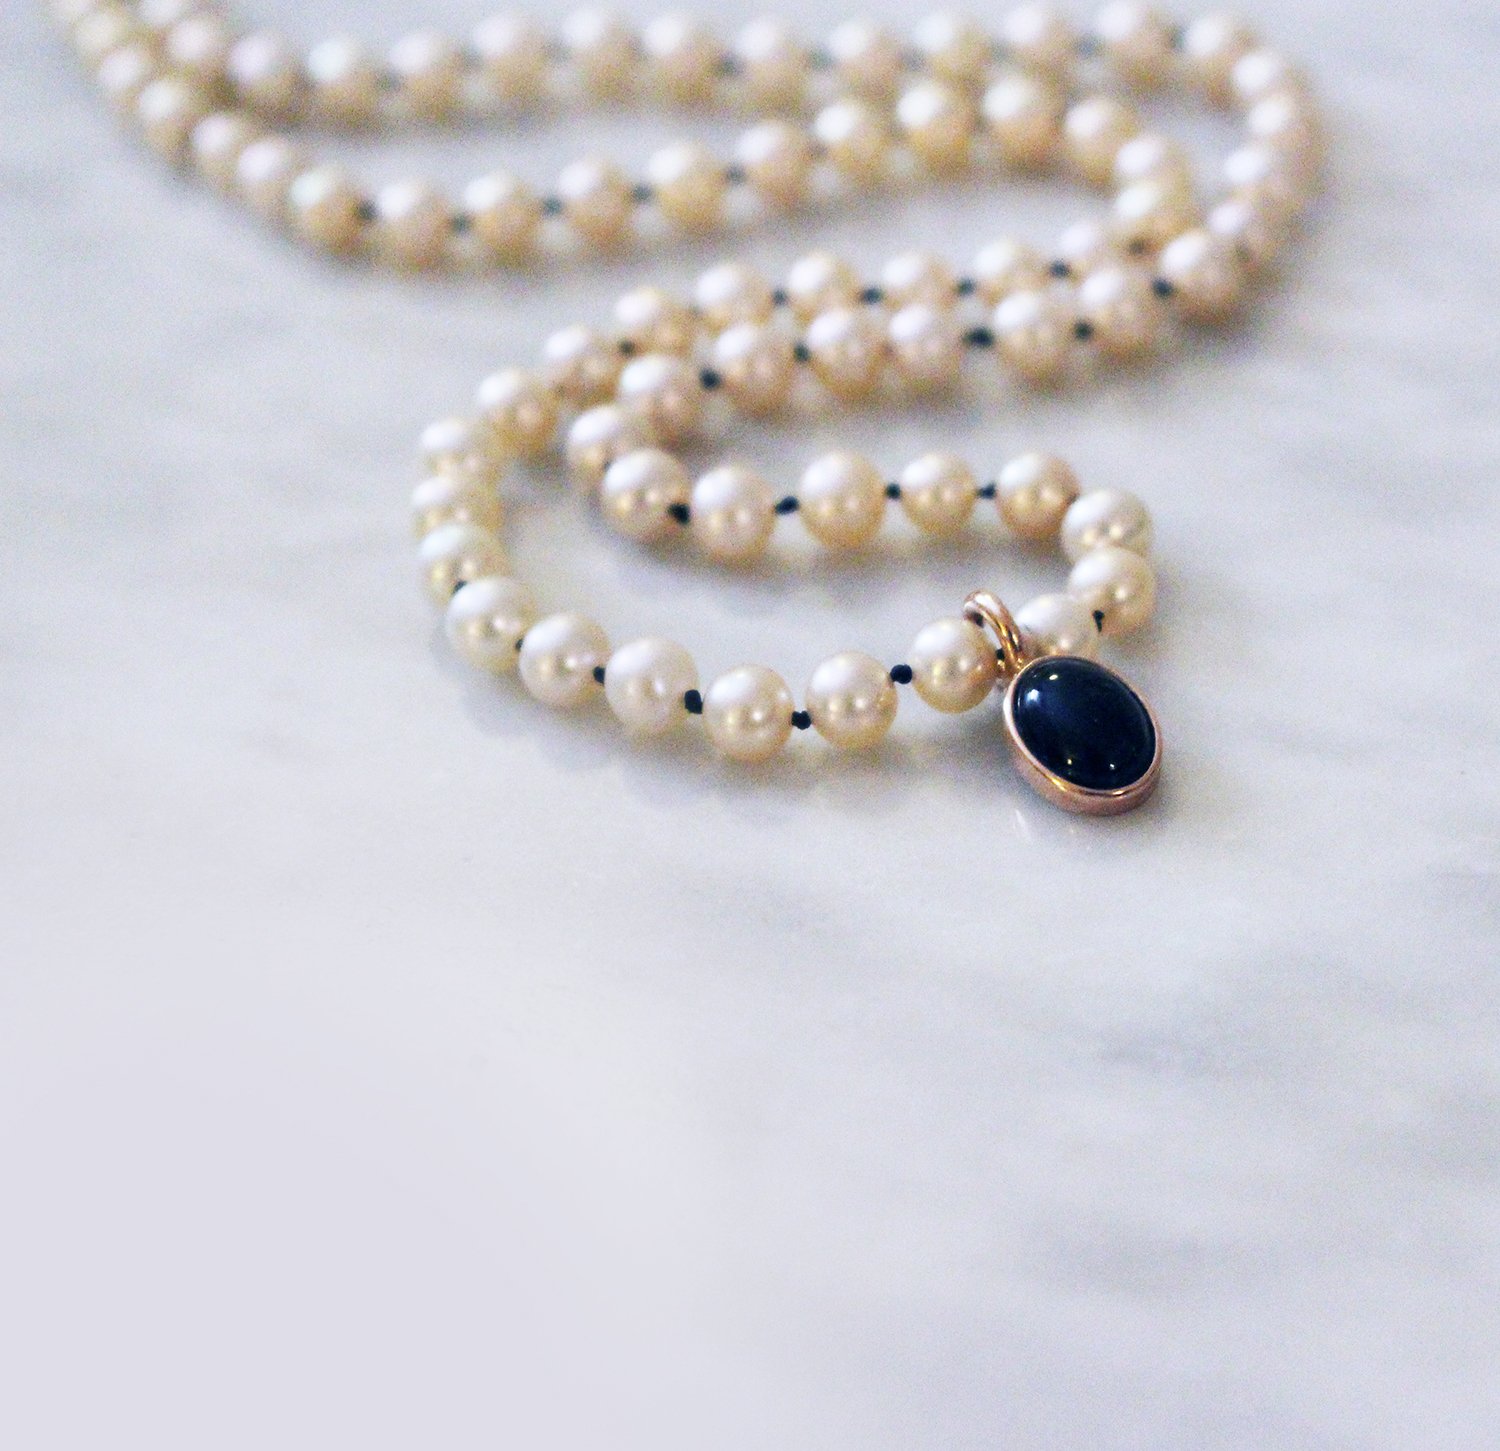 Pearl necklace with black onyx and mother of pearl - Kitsinian Jewelers